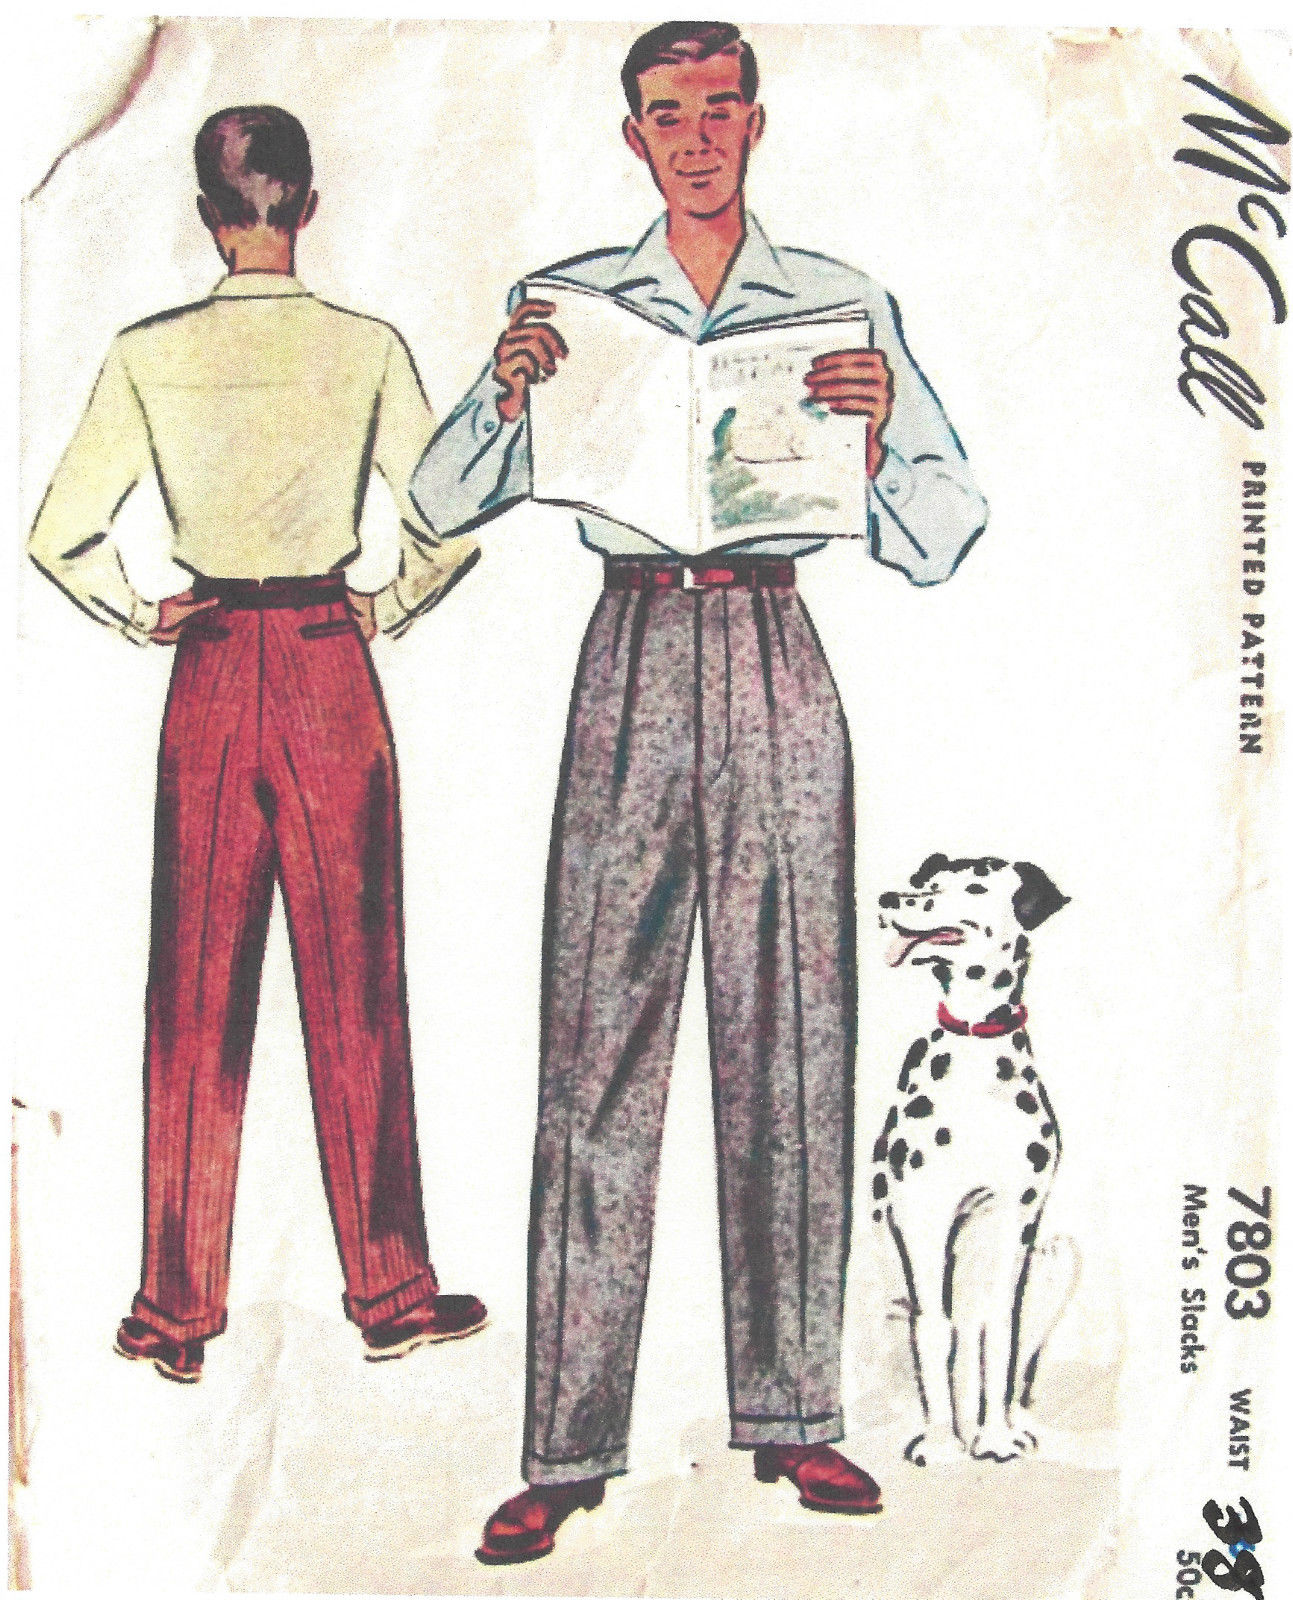 https://thevintagepatternshop.com/wp-content/uploads/imported/0/1940s-WW2-Vintage-Sewing-Pattern-W38-MENS-PANTS-TROUSERS-1311-261548622510.jpg